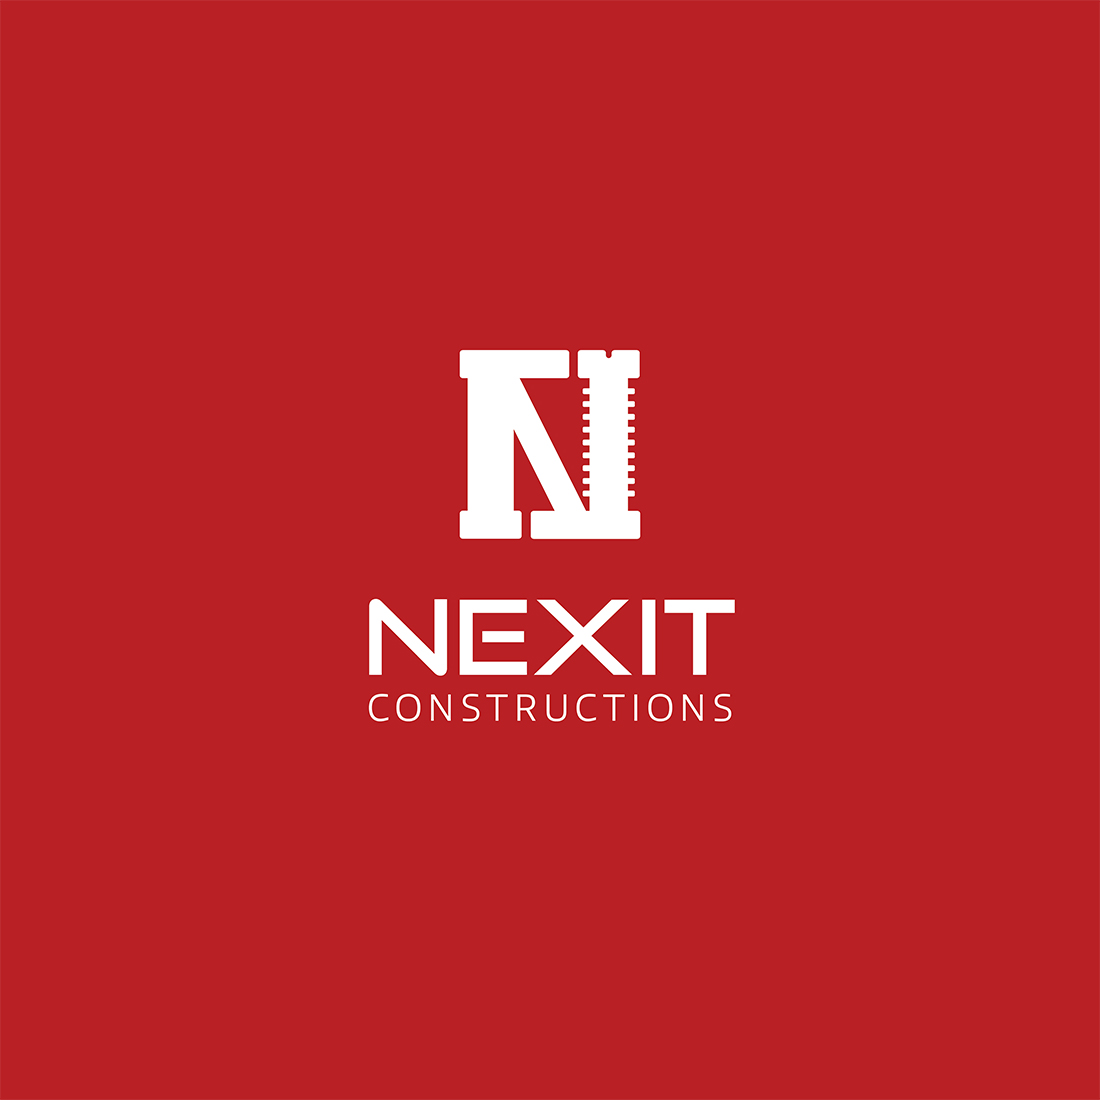 Nexit Constructions Logo with red background.